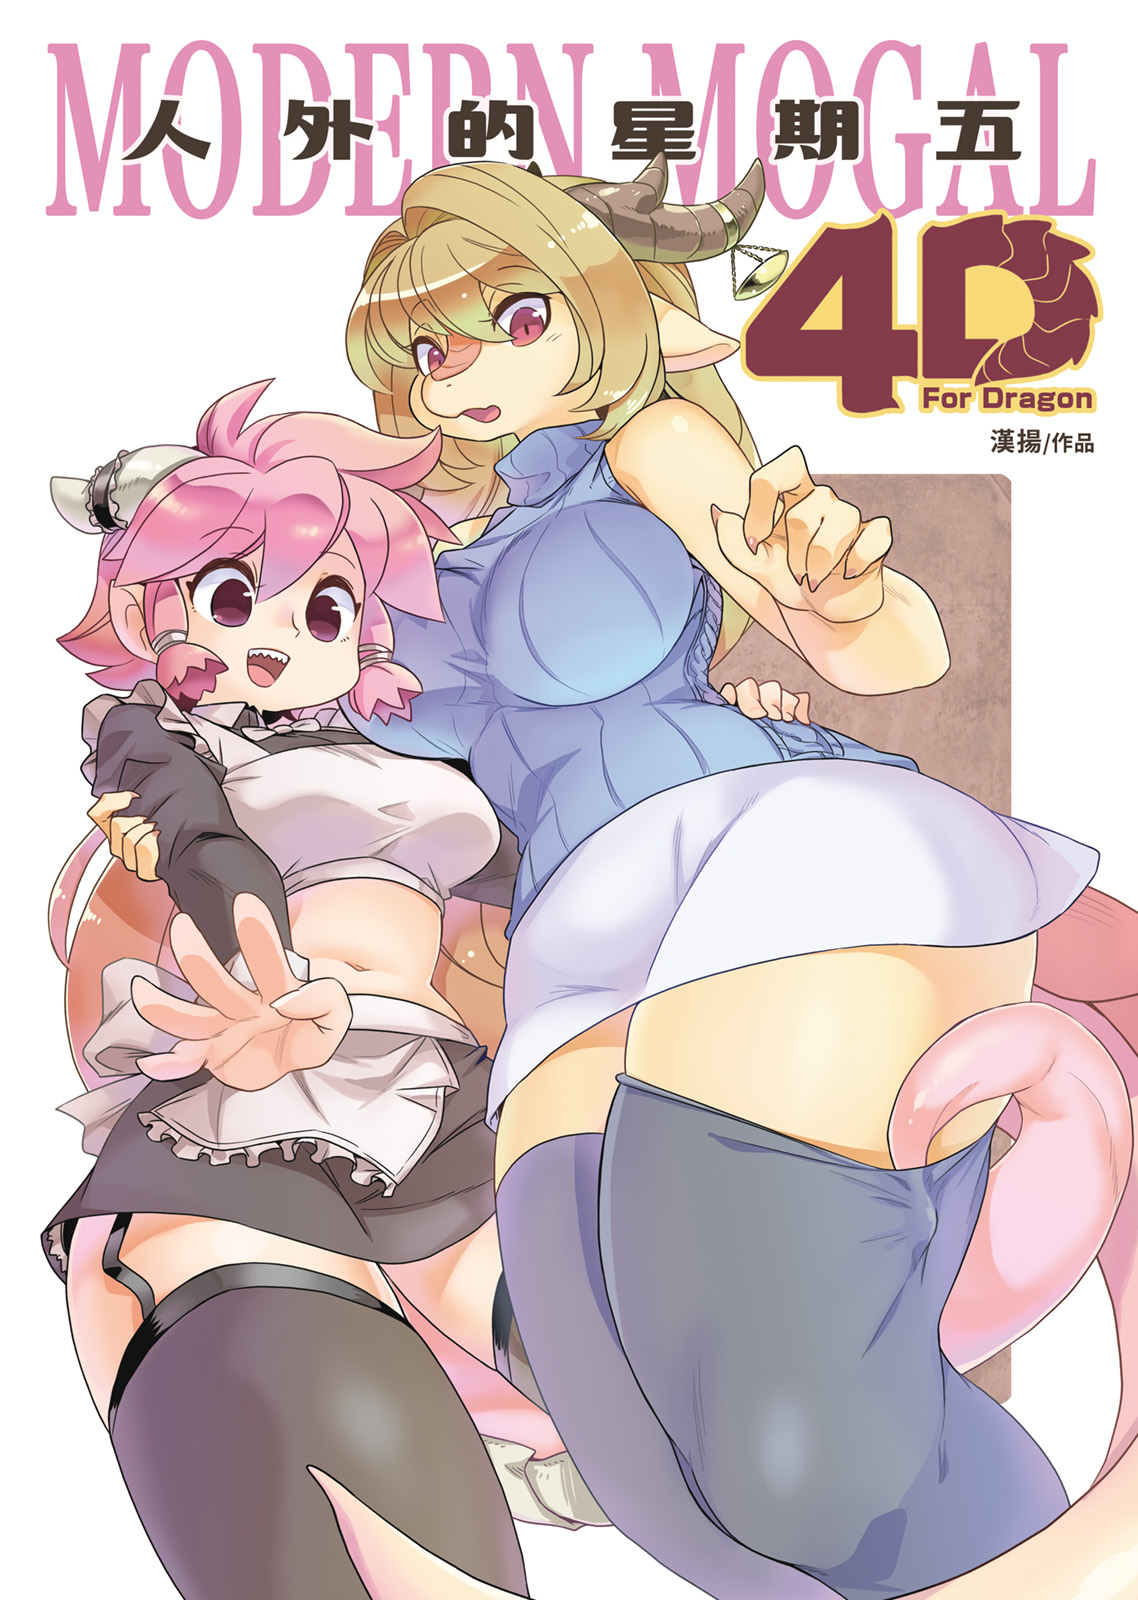 Cover of Modern MoGal